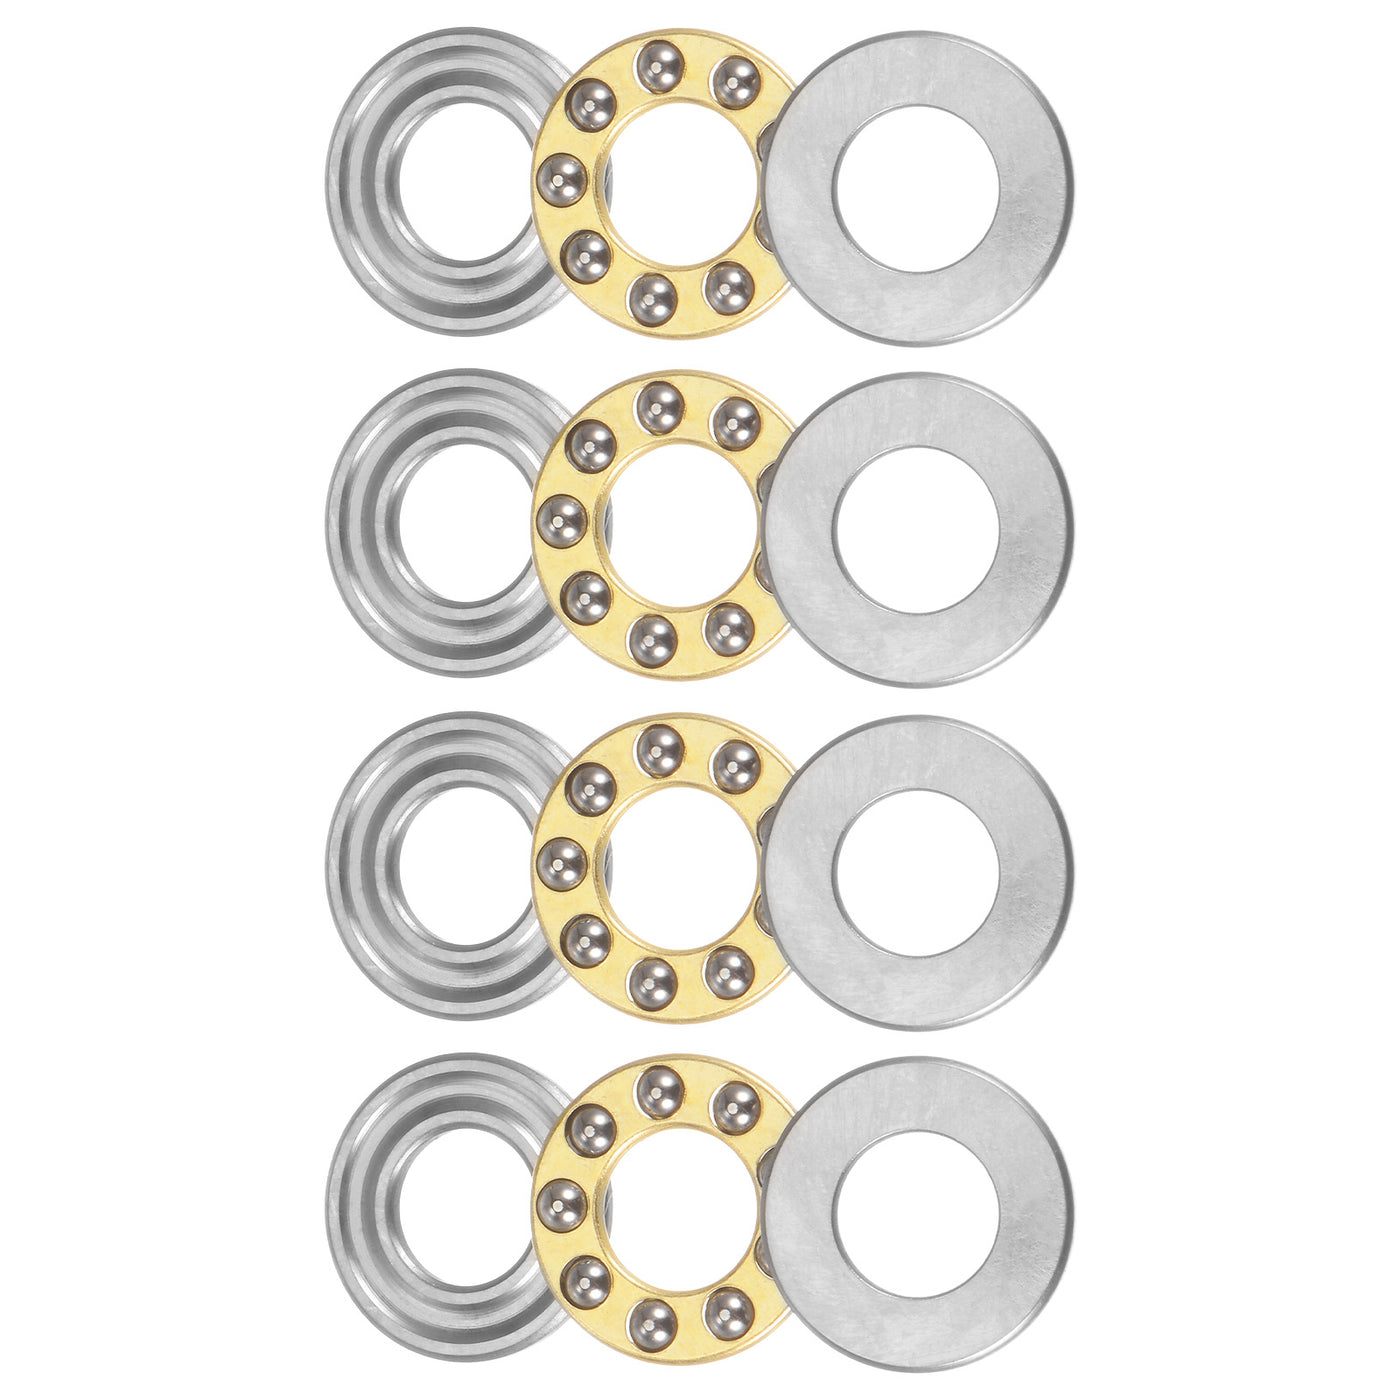 uxcell Uxcell F8-16M Thrust Ball Bearing 8x16x5mm Brass with Washers ABEC3 4pcs